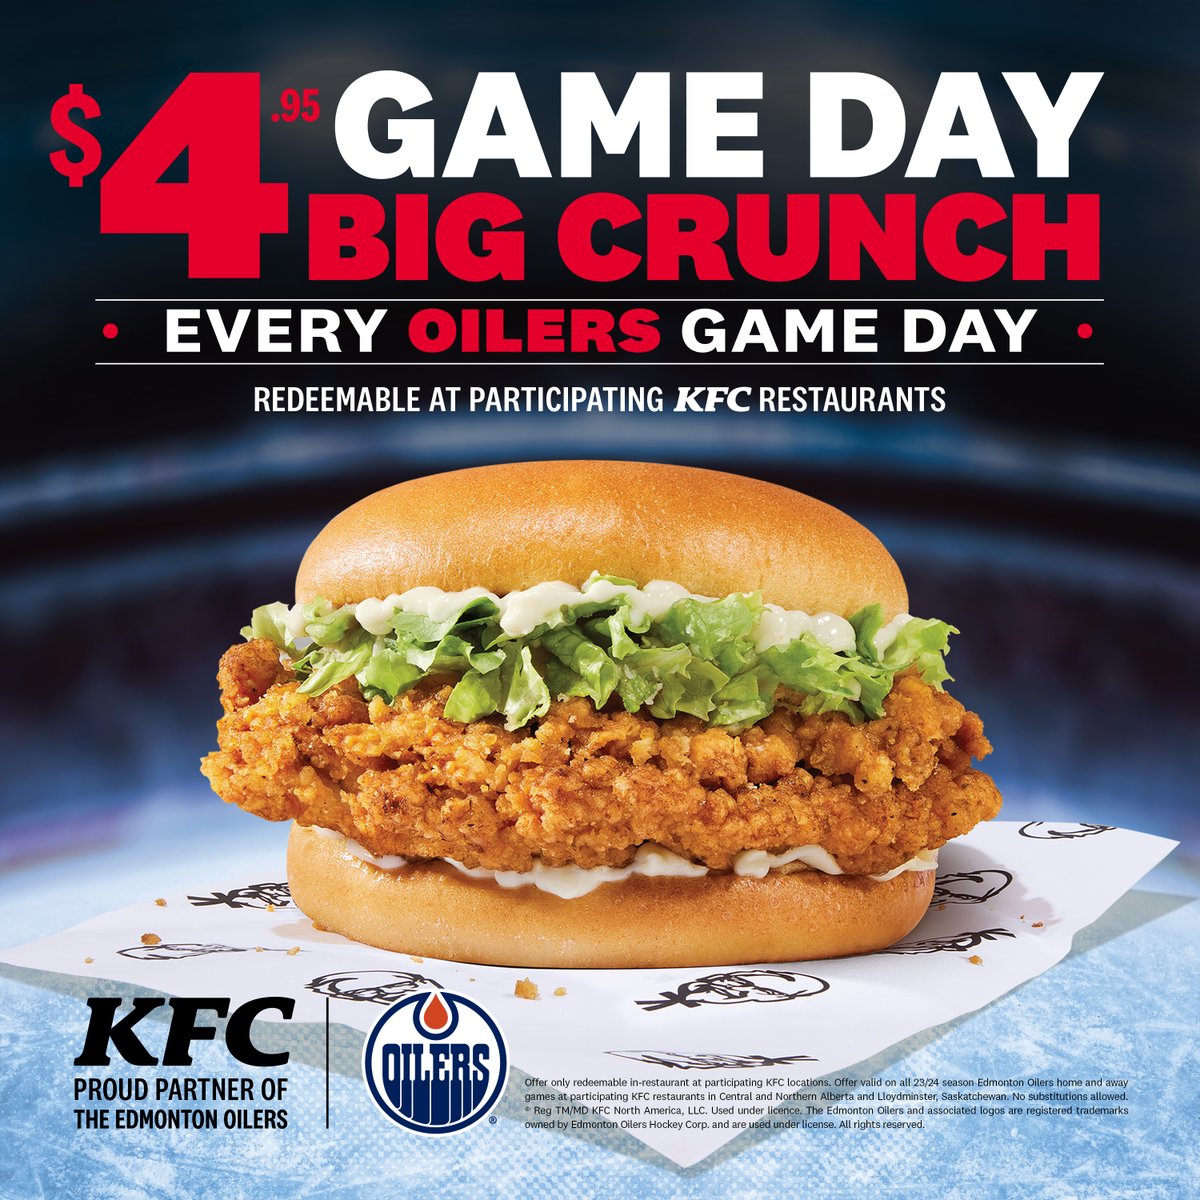 💥 WCF GAME DAY BIG CRUNCH 💥 You can get a $4.95 Big Crunch from @kfc_canada every #Oilers game day! *offer only redeemable in-restaurant at participating KFC locations*